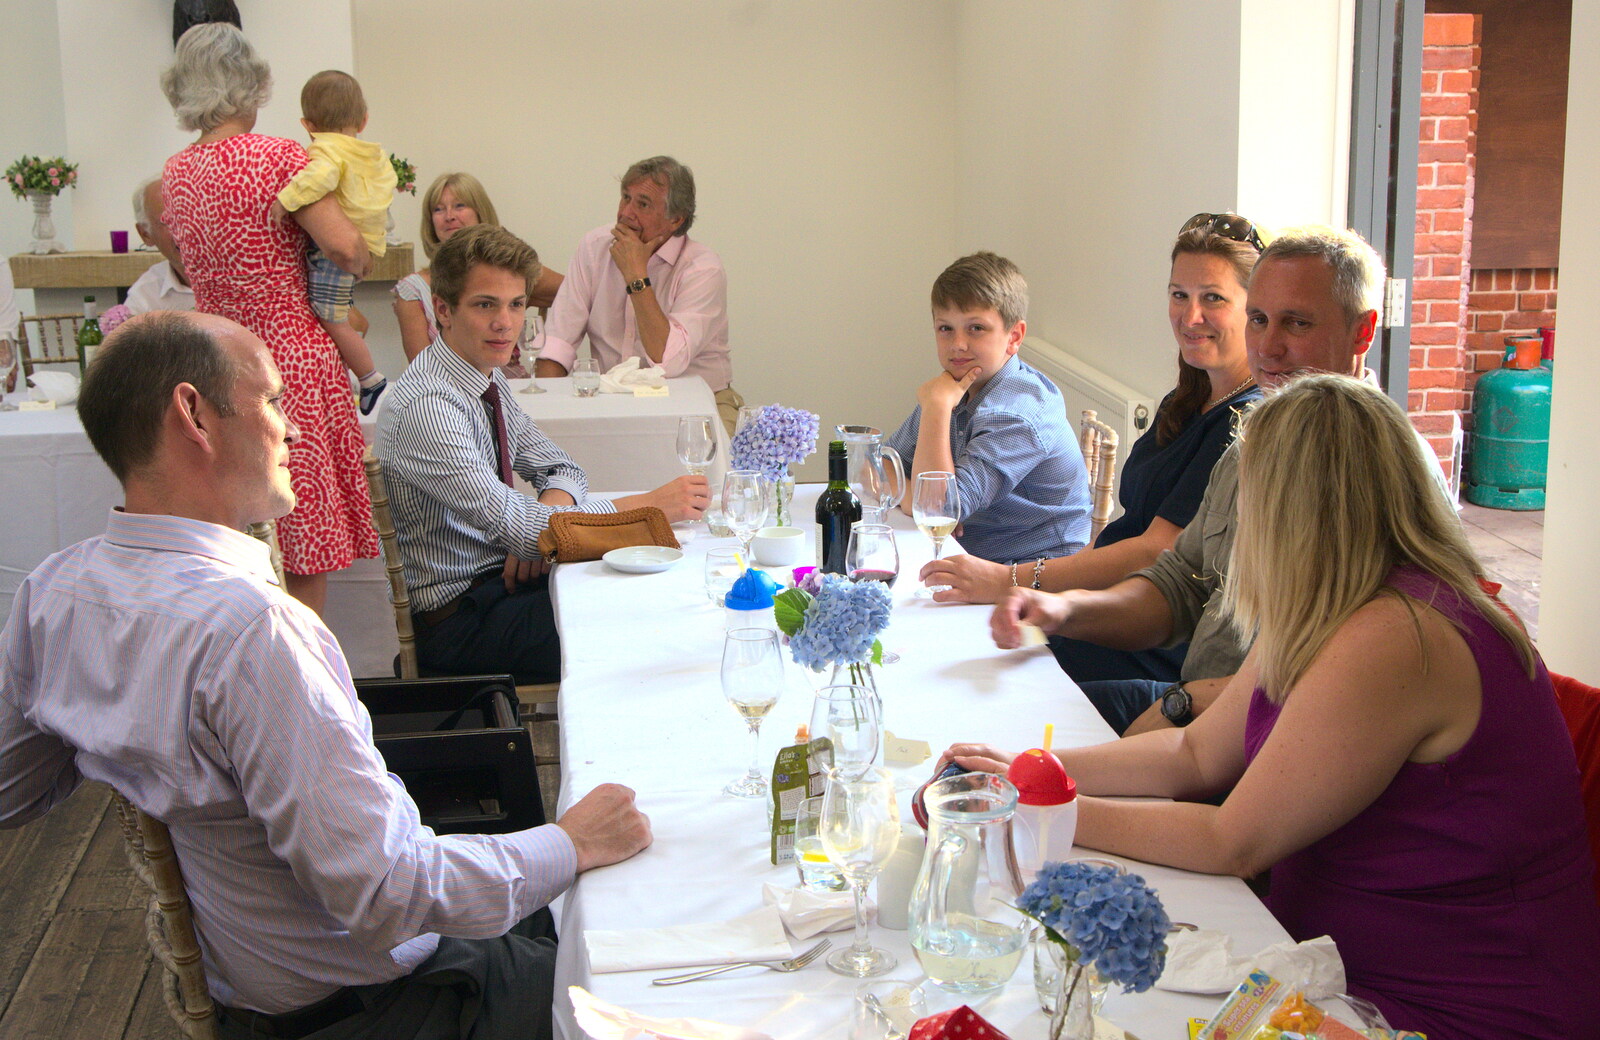 Anniversary guests from Bob and Bernice's 50th Wedding Anniversary, Hinton Admiral, Dorset - 25th July 2014